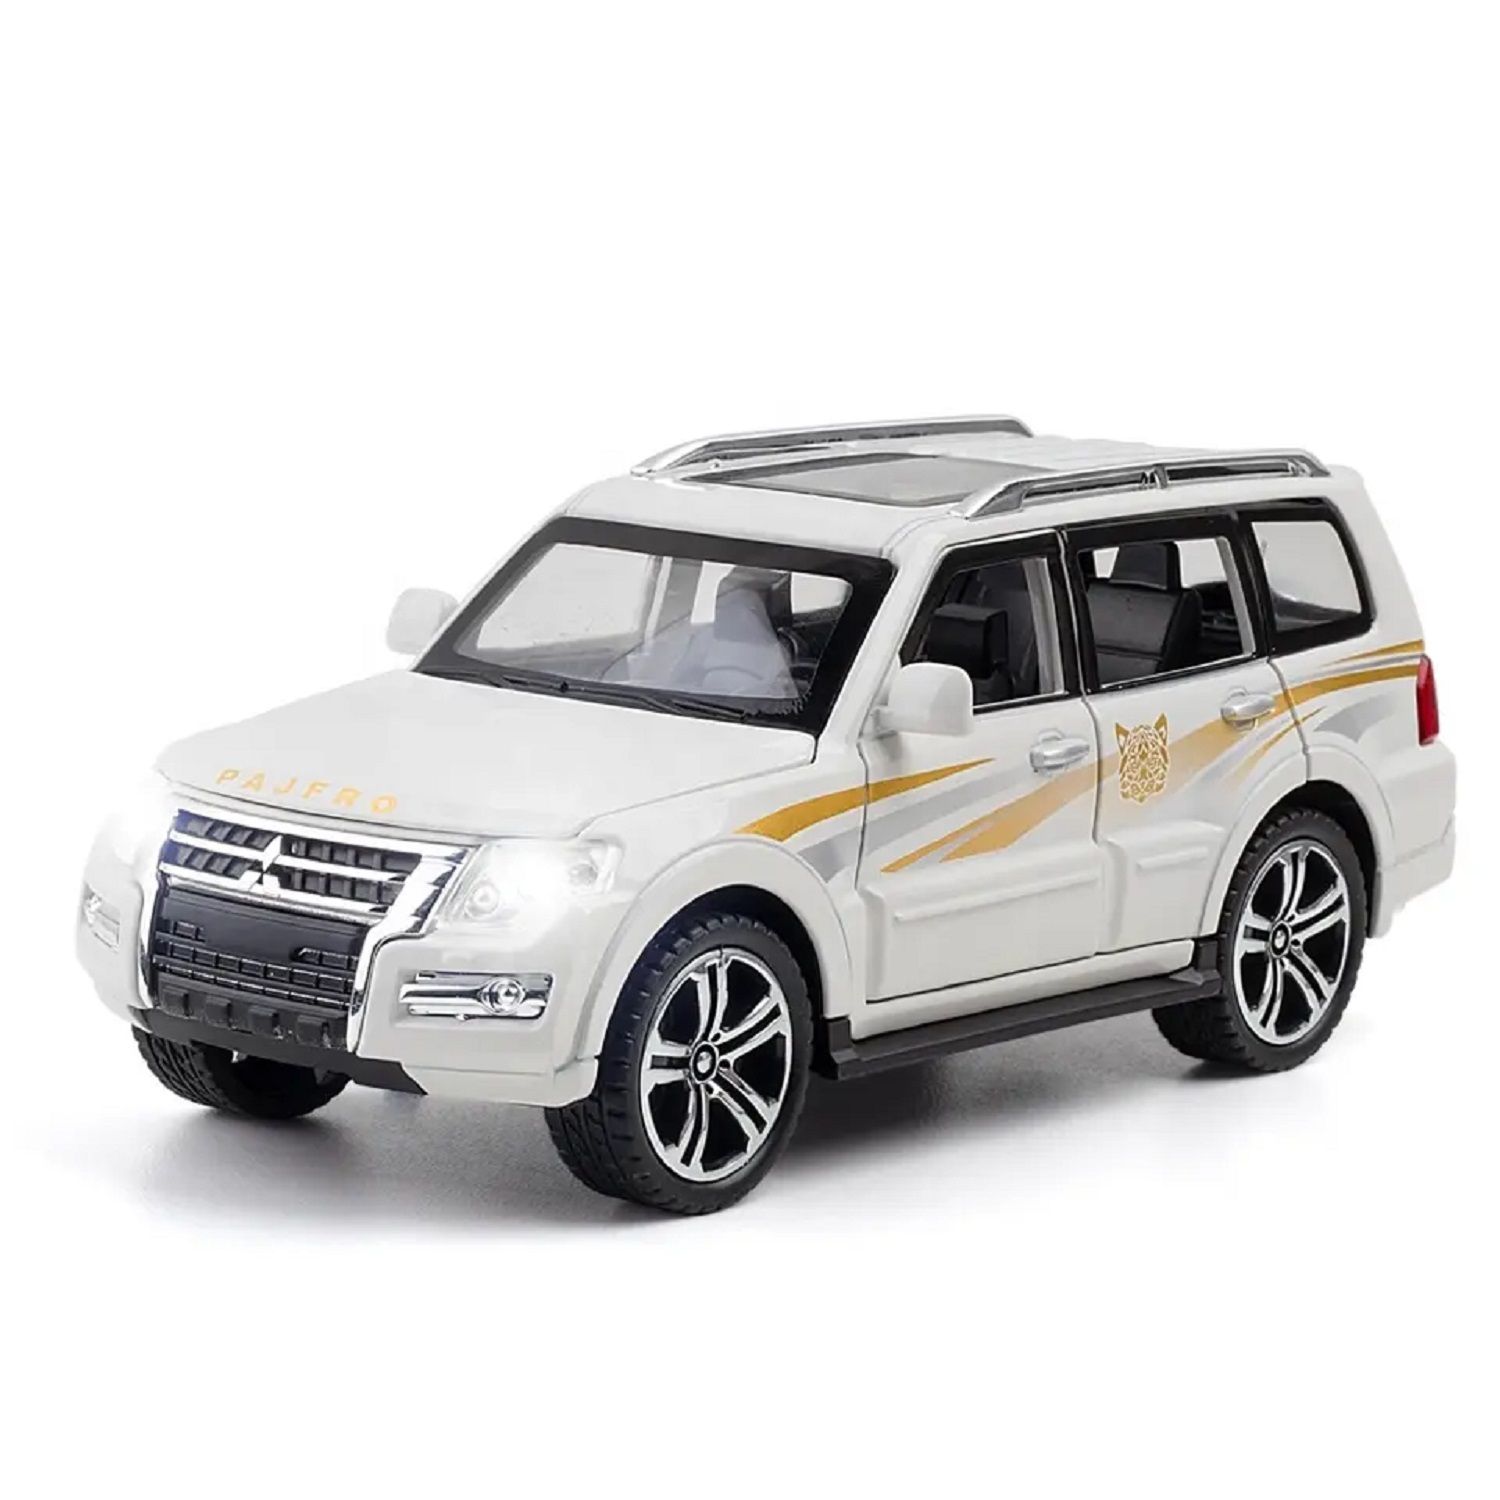 KTRS ENTERPRISE 1:32 for Mitsubishi Pajero SUV Alloy Model Diecasts Metal Car Simulation Sound Light Toy Decoration Gift Replica Cars